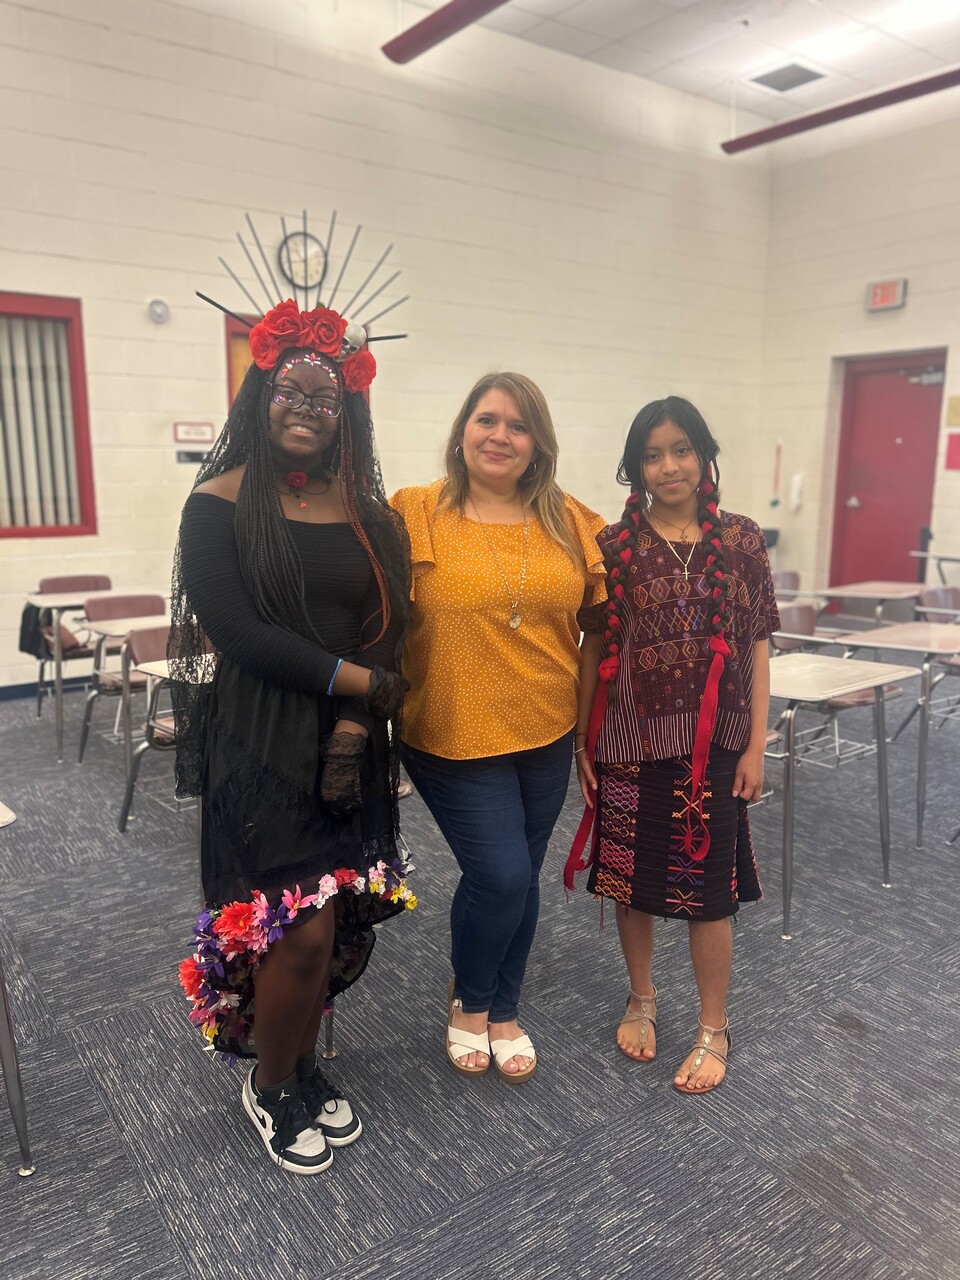 A Campbell Middle School student was awarded Best of Show for Traditional Dress. She is La Catrina on the left, Ja"Nyla Henry. Yalili Diaz-Sales was awarded 2nd place for her presentation on her Guatemalan Traditional Dress. Ms. Karelys Nunuz is their teacher, center.